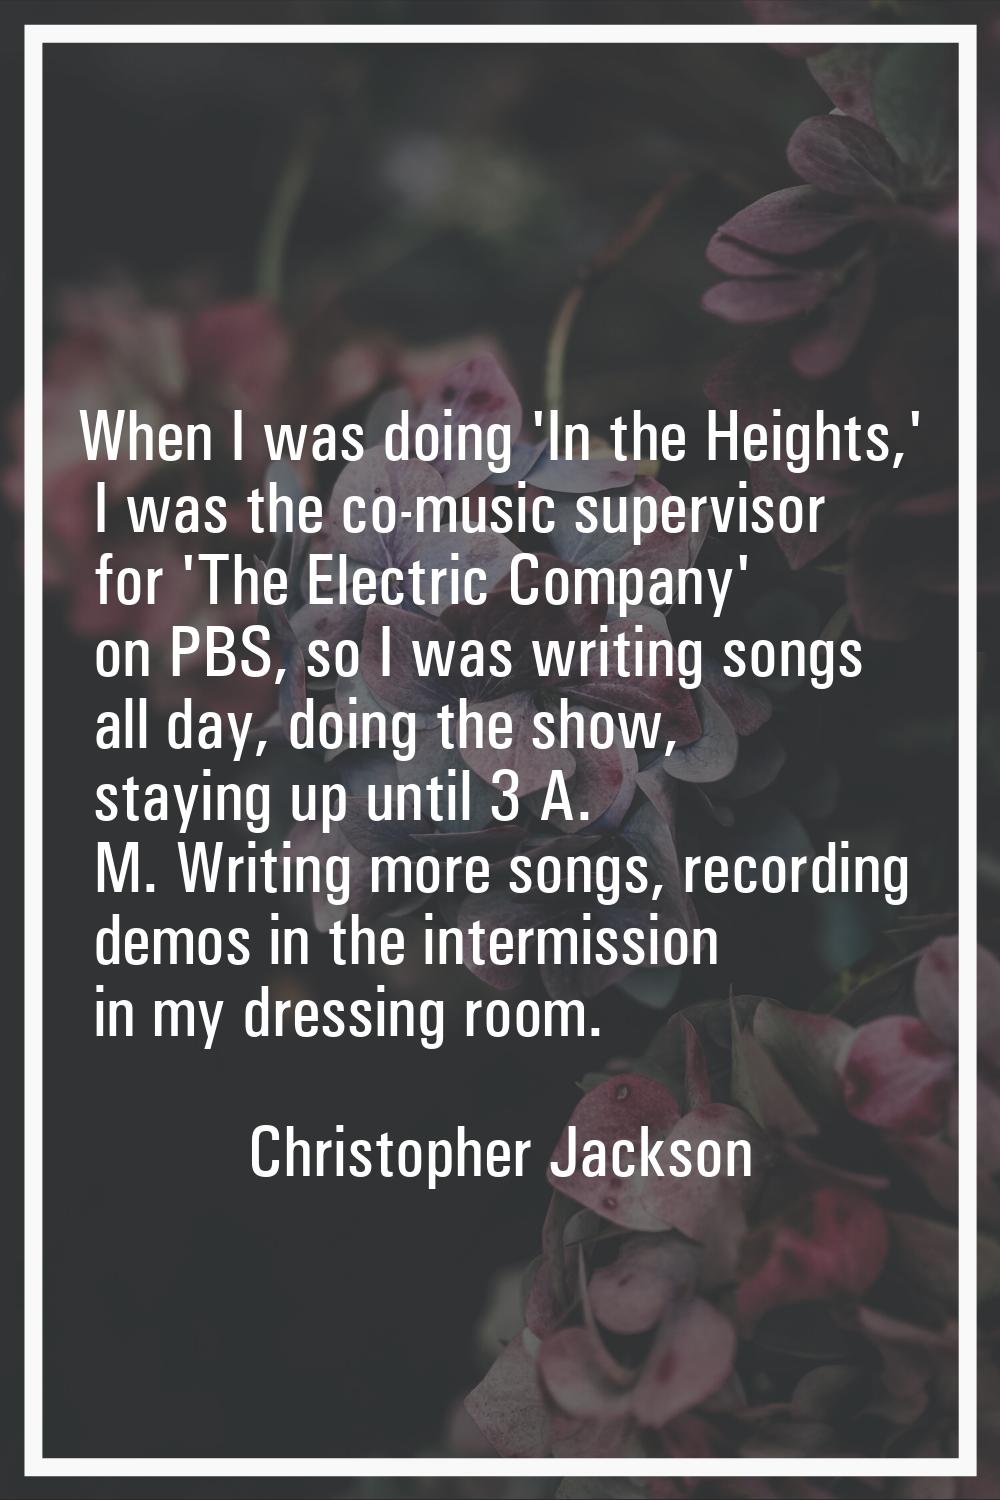 When I was doing 'In the Heights,' I was the co-music supervisor for 'The Electric Company' on PBS,